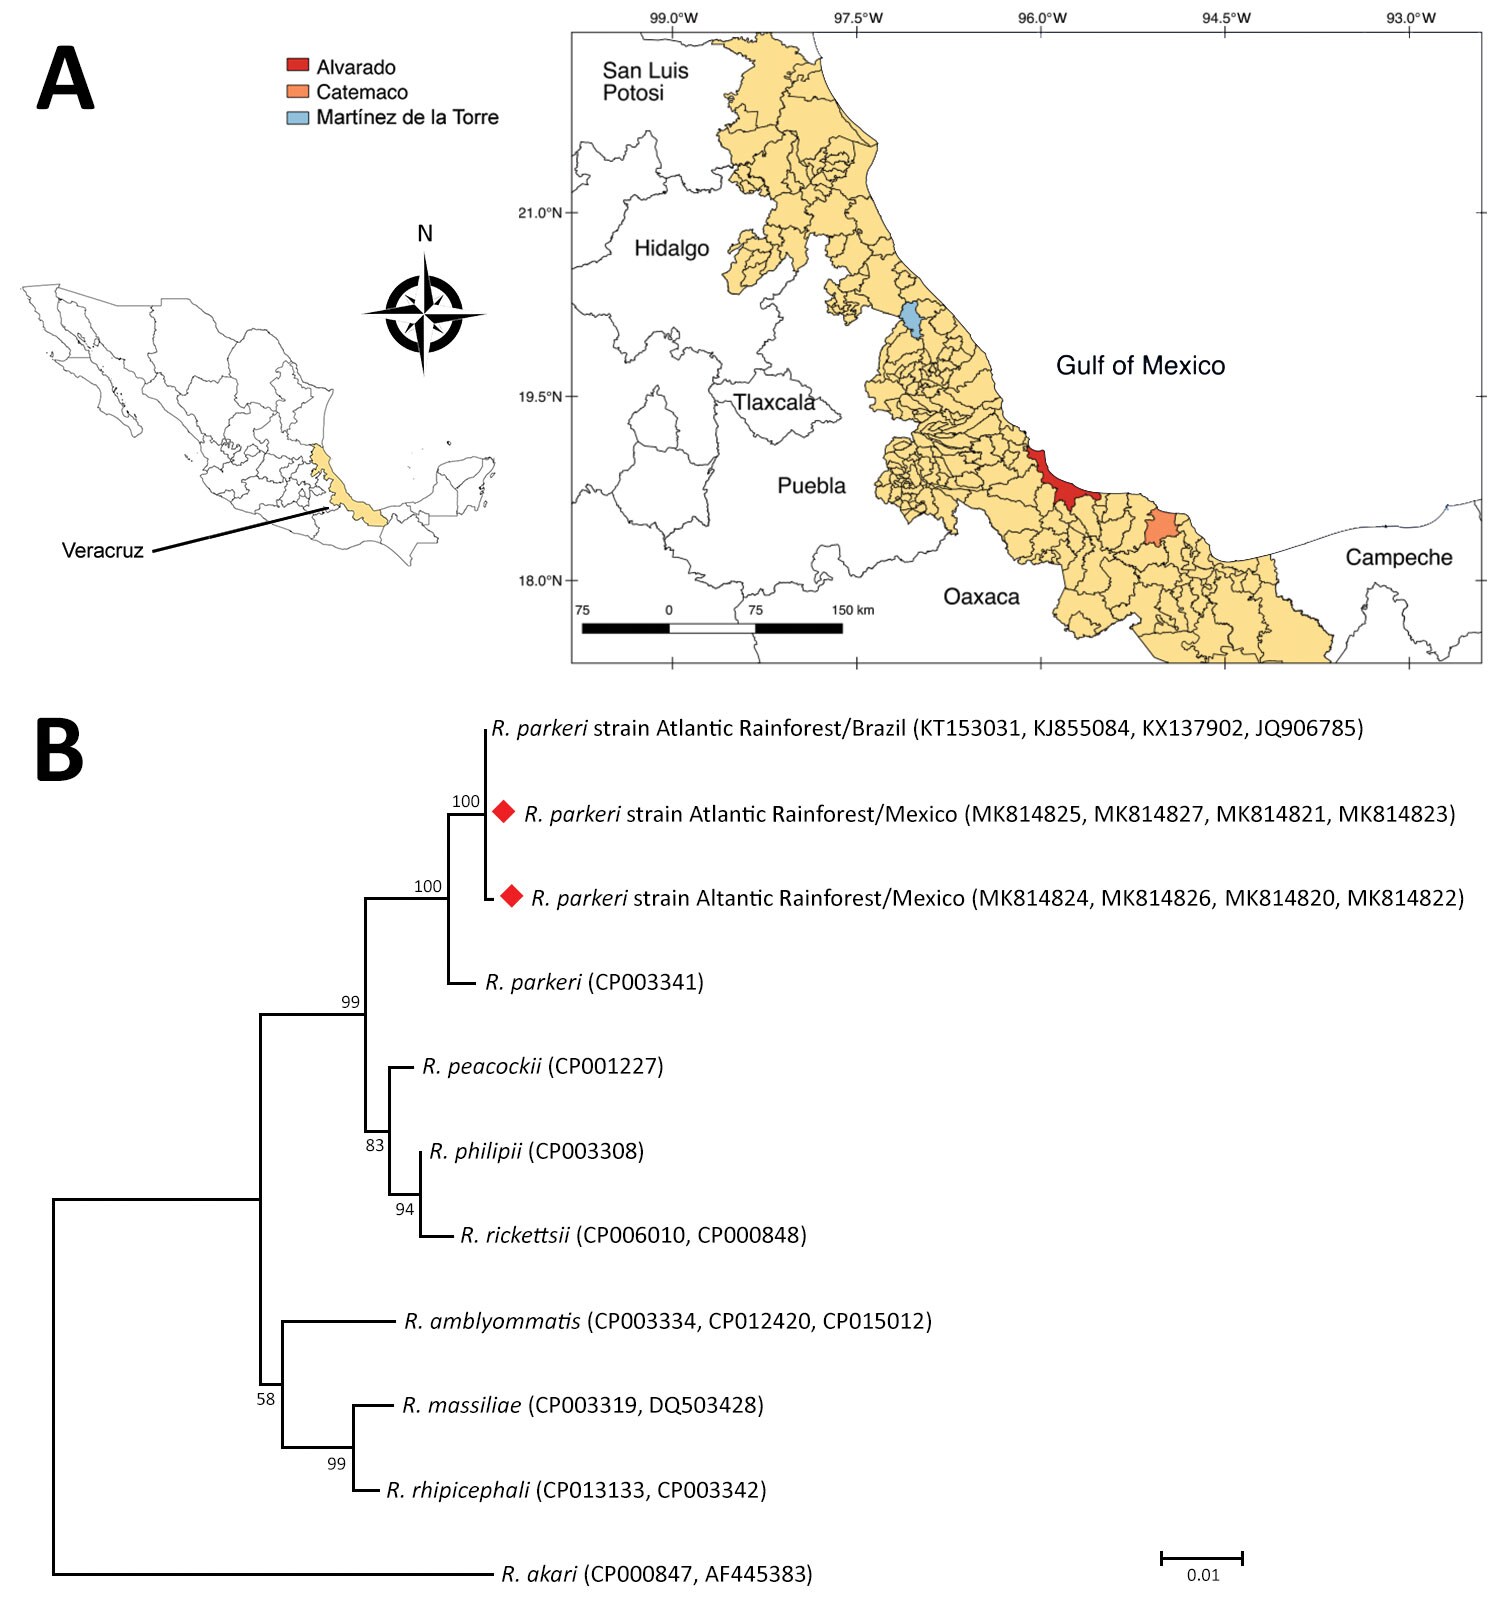 Amblyomma ovale tick sampling sites and phylogenetic analysis of tickborne Rickettsia parkeri strain Atlantic Rainforest isolates (diamonds), state of Veracruz, Mexico, July–August 2018. A) Sites where A. ovale ticks were collected from dogs to assess prevalence of R. parkeri strain Atlantic Rainforest. Inset shows location of Veracruz state in Mexico. QGis (https://www.qgis.org) was used for map construction. B) Maximum-likelihood phylogenetic tree generated with concatenated segments of the gl